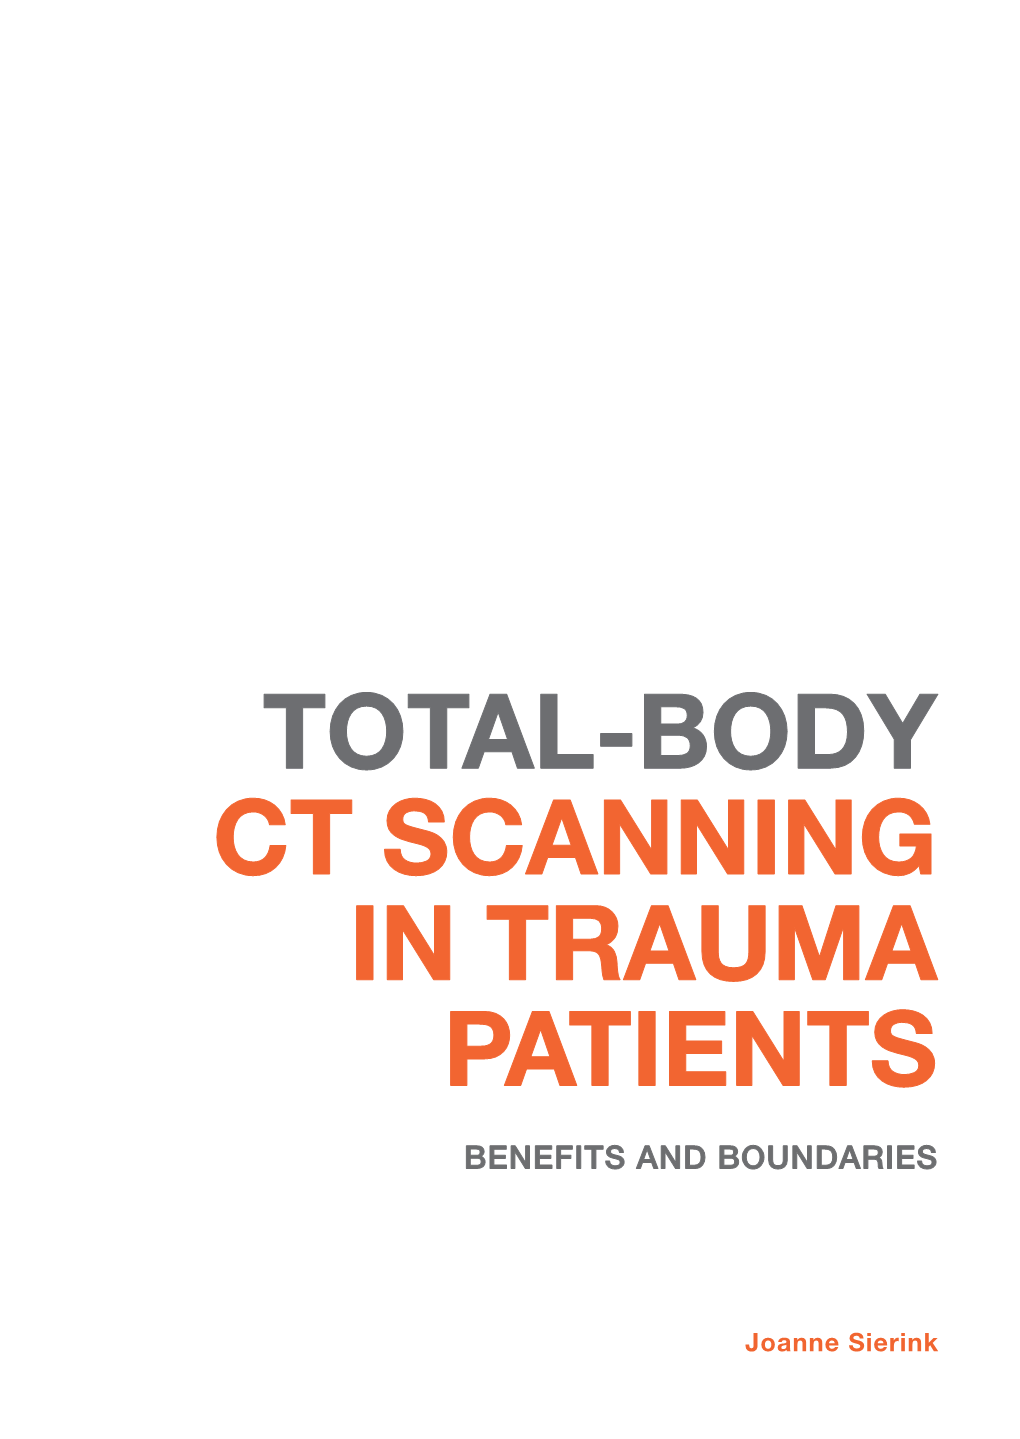 Totaldbody CT SCANNING in TRAUMA PATIENTS